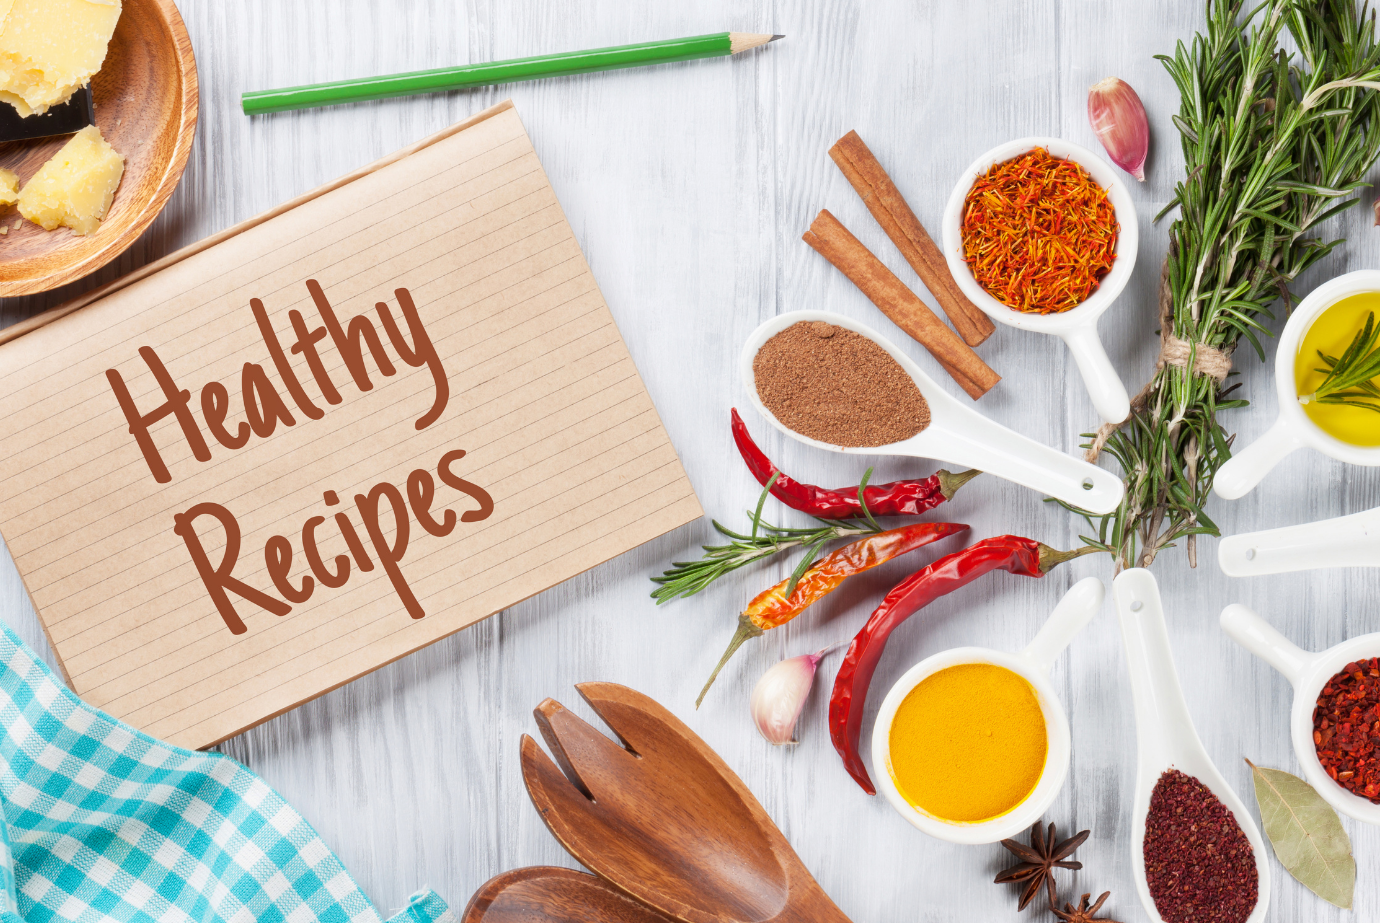 A Healthy Recipe book is just one of your tools to success